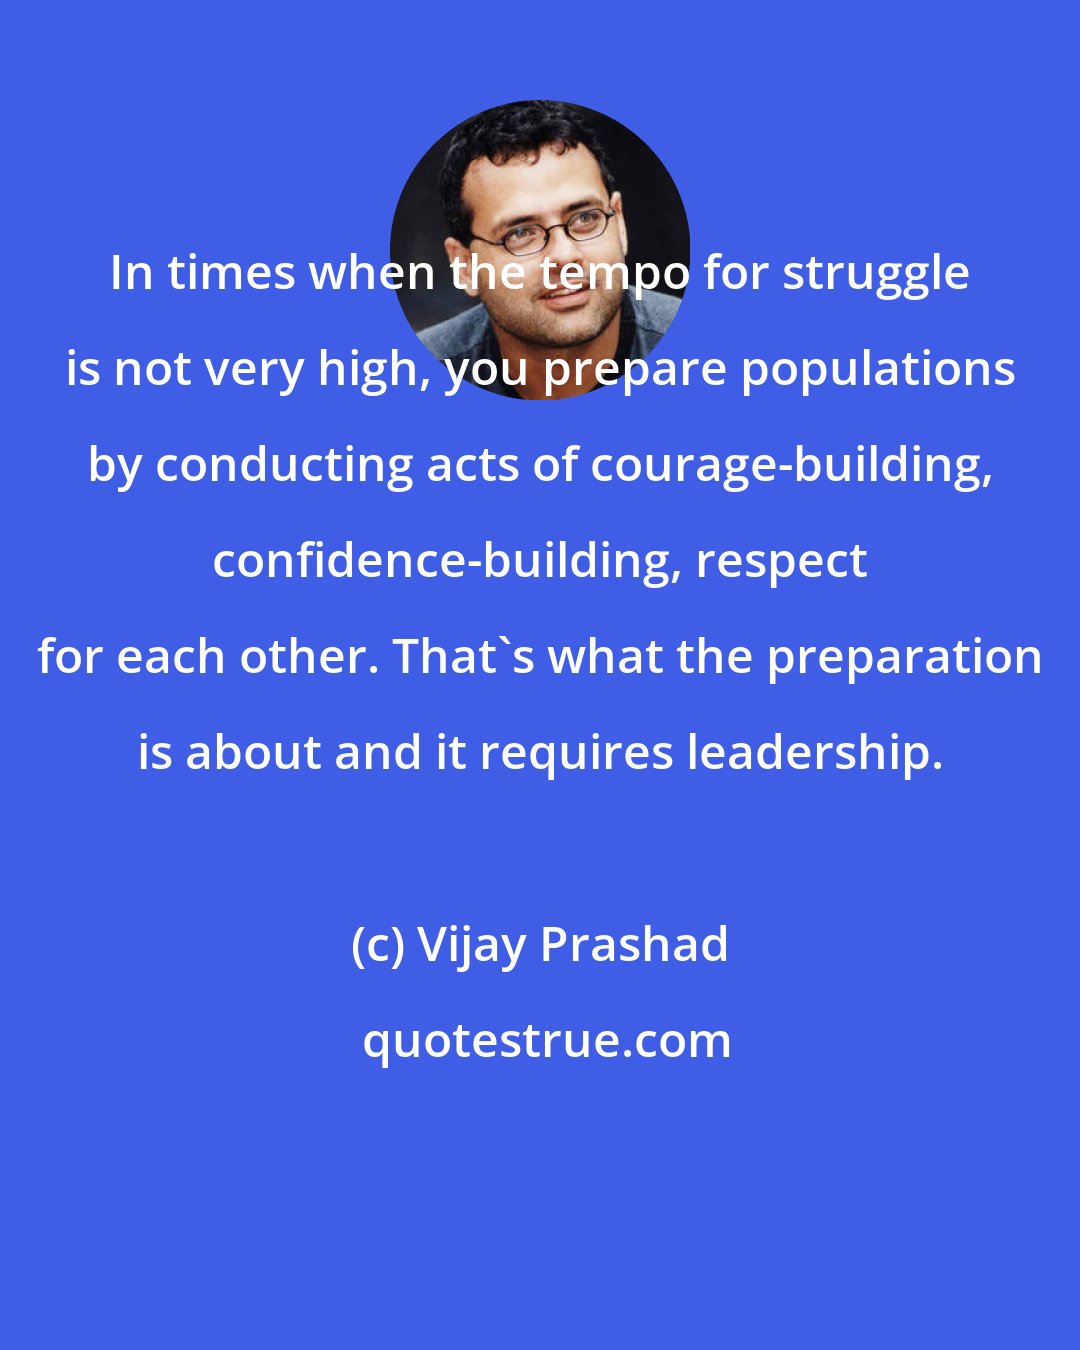 Vijay Prashad: In times when the tempo for struggle is not very high, you prepare populations by conducting acts of courage-building, confidence-building, respect for each other. That's what the preparation is about and it requires leadership.